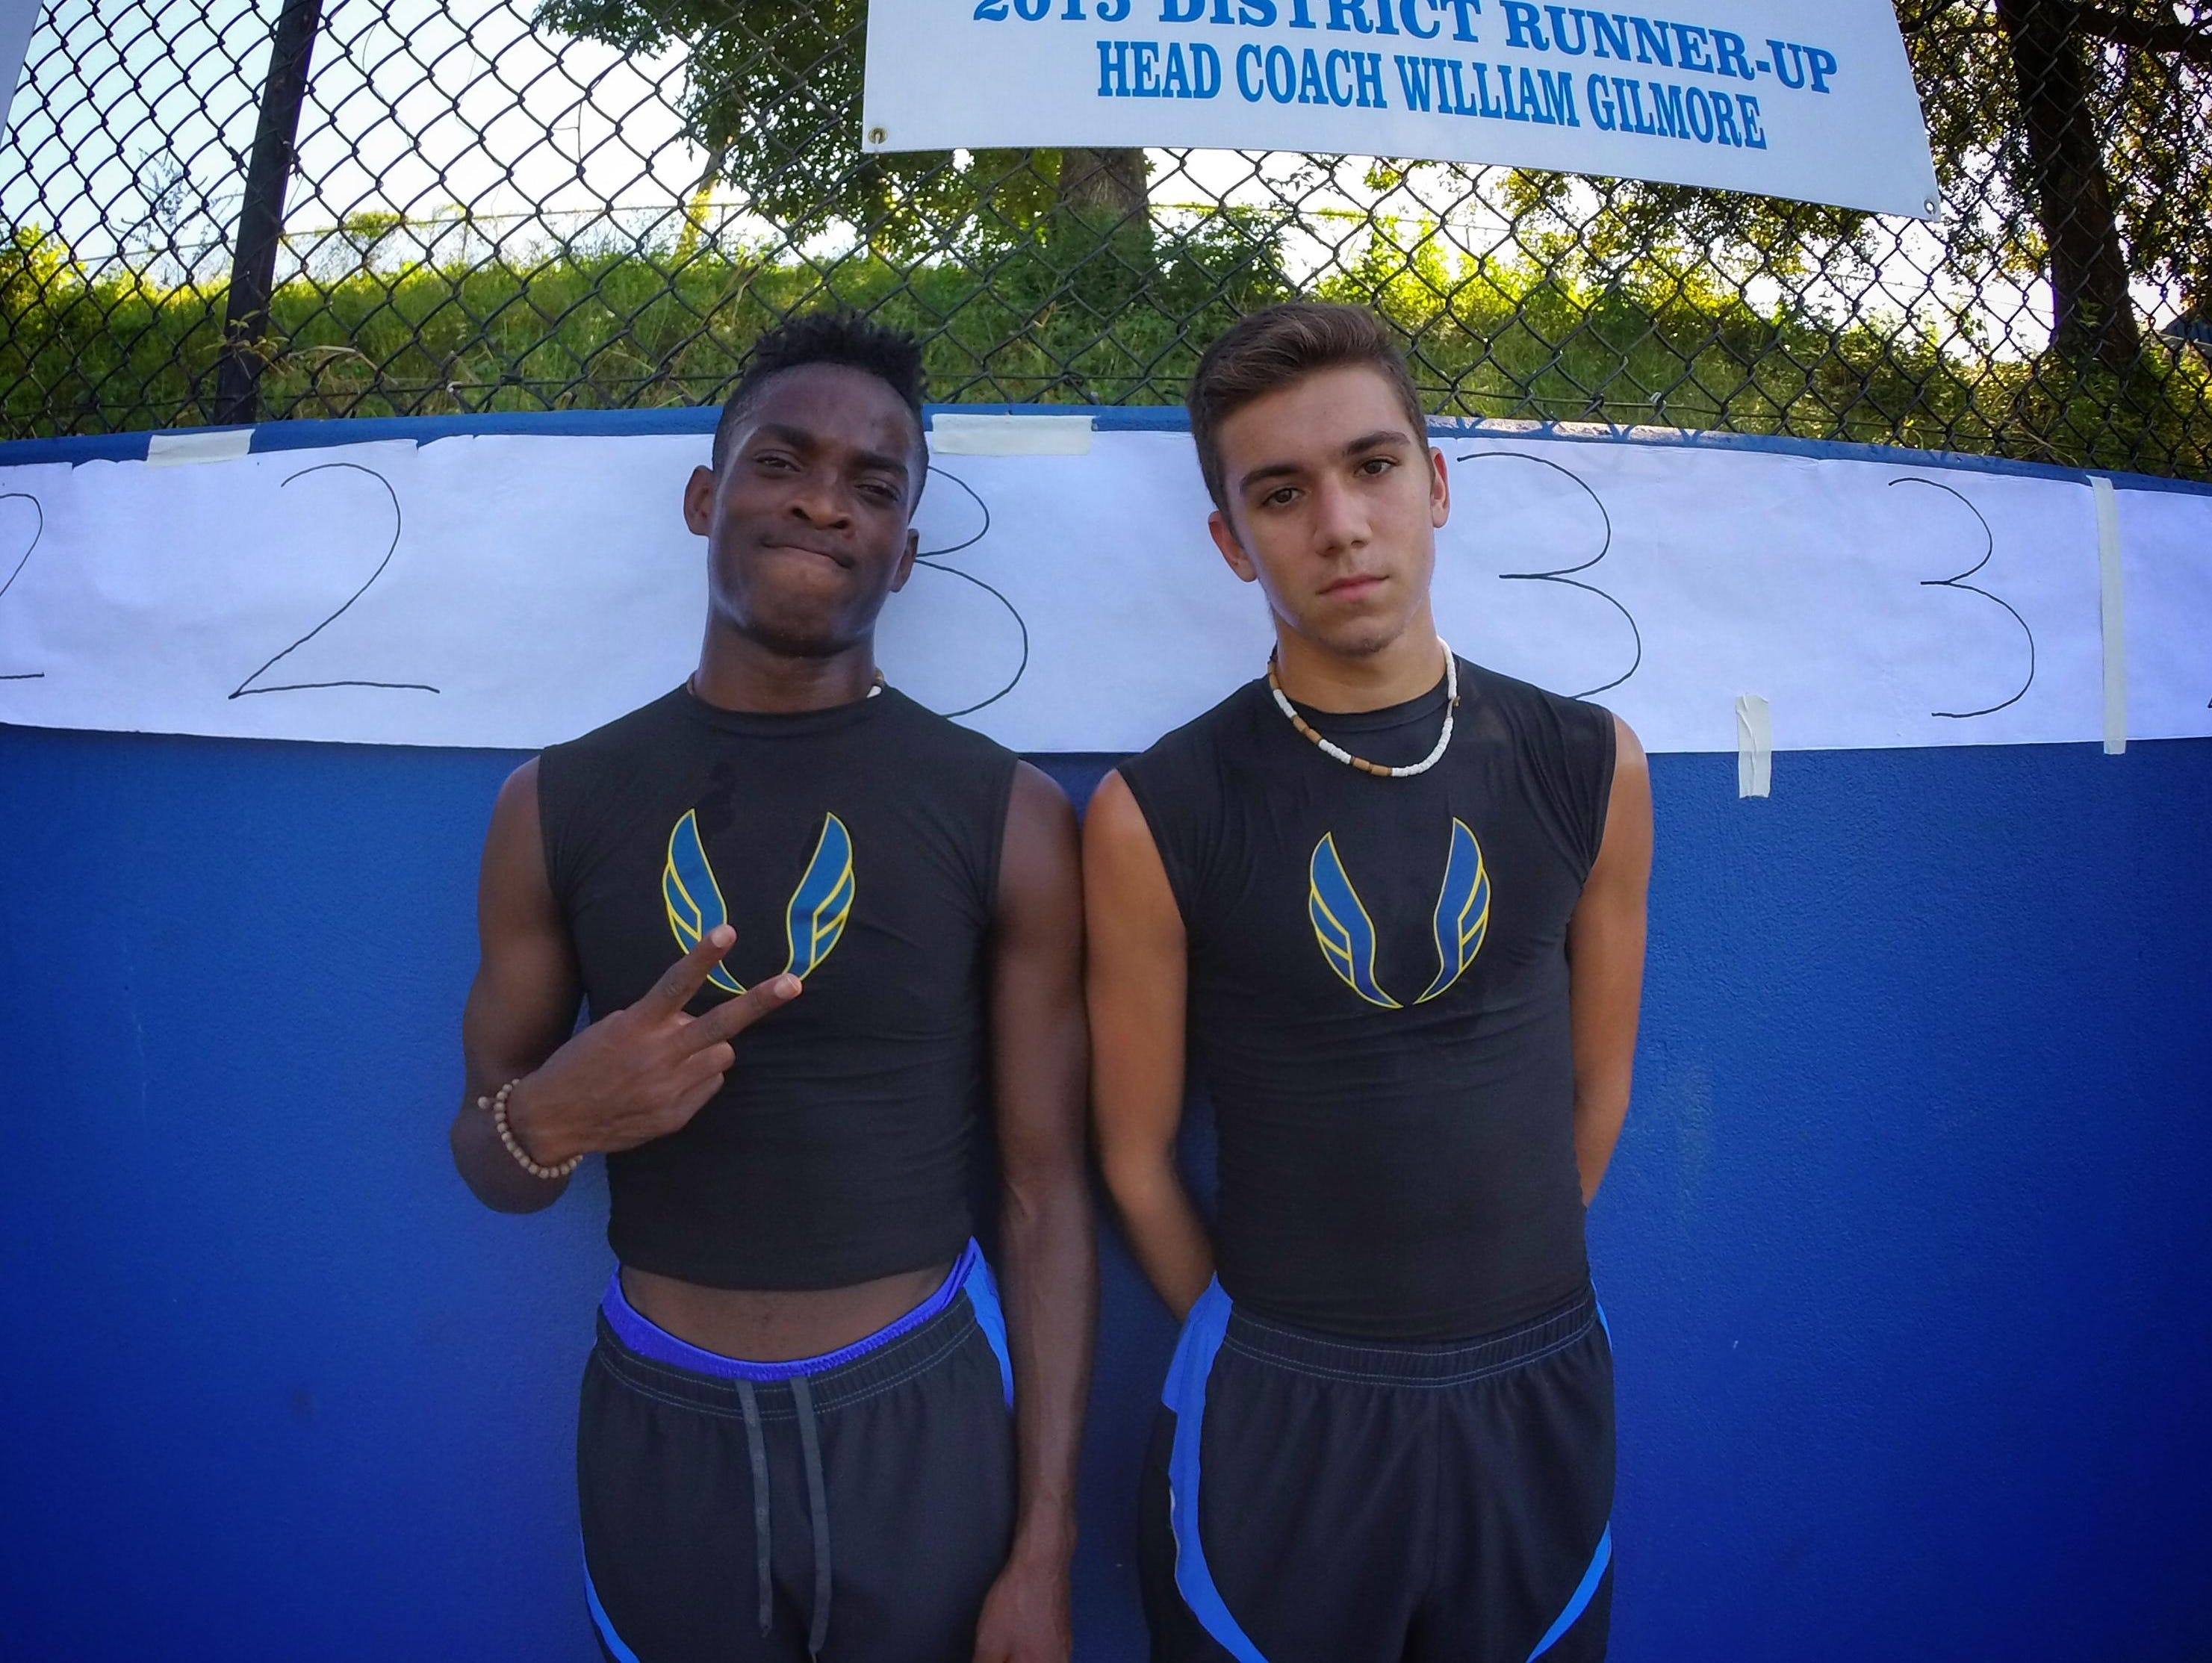 Rickards seniors Solomon Stevens and Evan Garrison are neck-and-neck to break the 17-minute barrier and hold the school record.